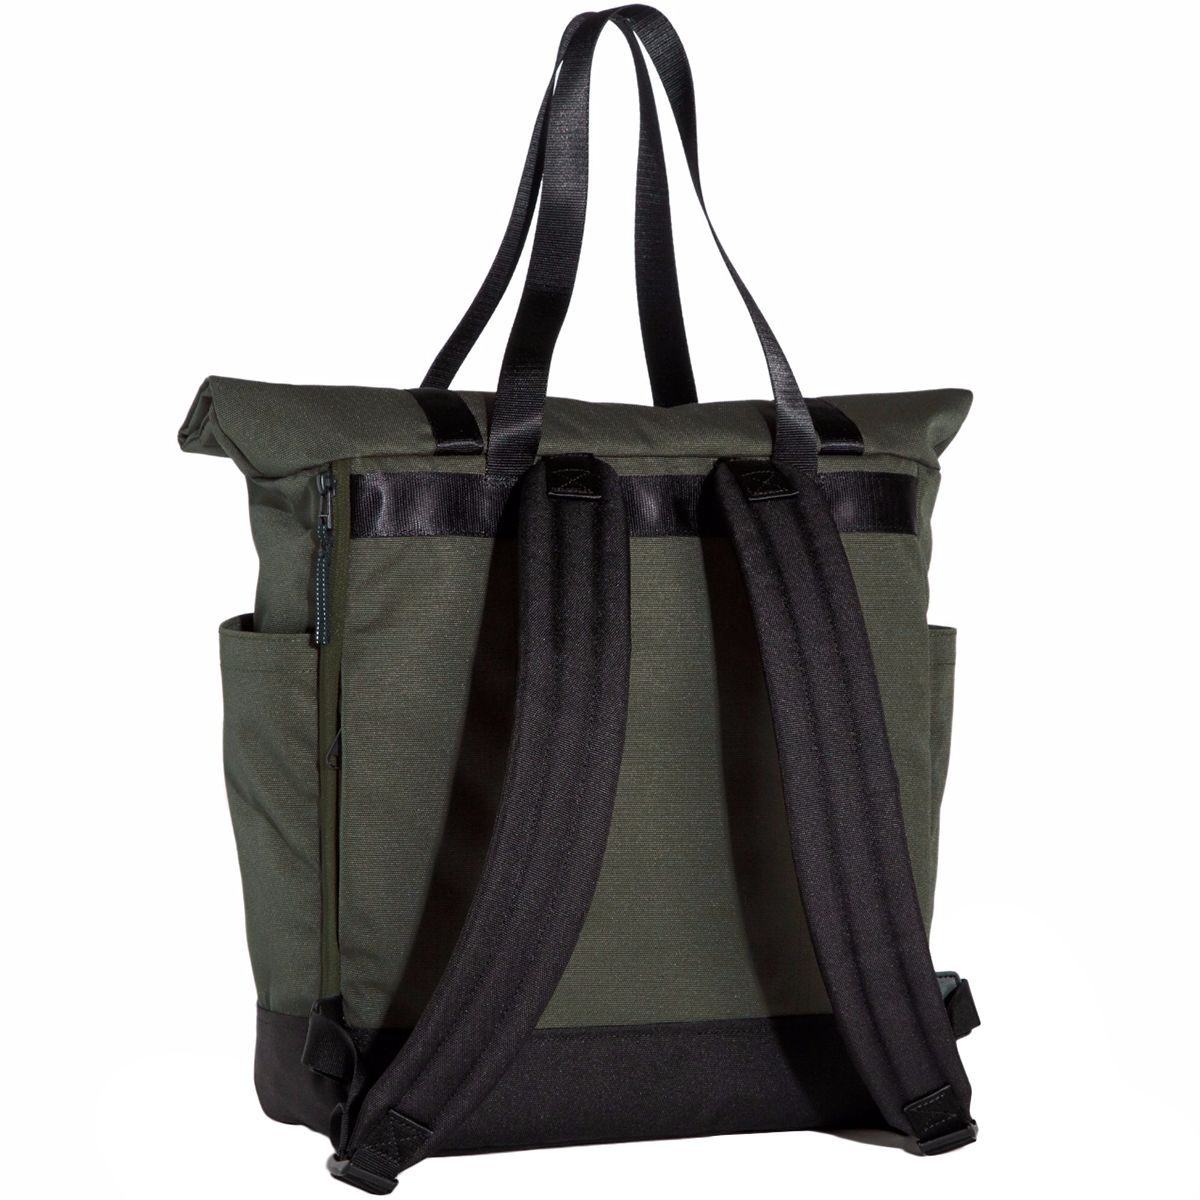 Timbuk2 Forge Tote - Women's | Backcountry.com